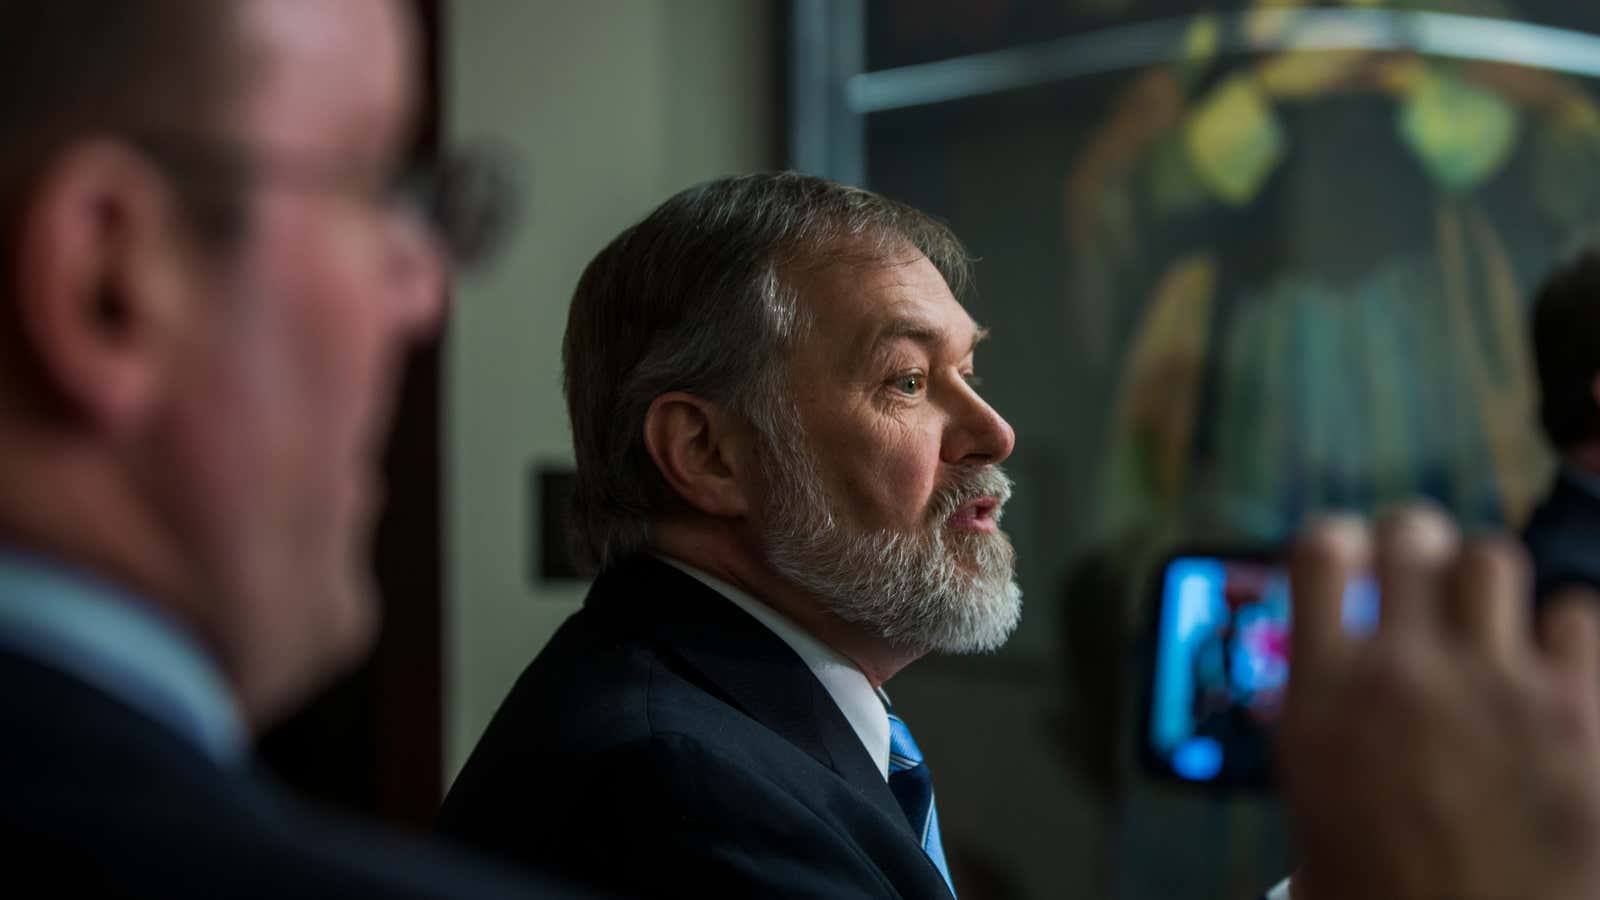 Scott Lively, center, is pictured in Washington, D.C. in February 2014.